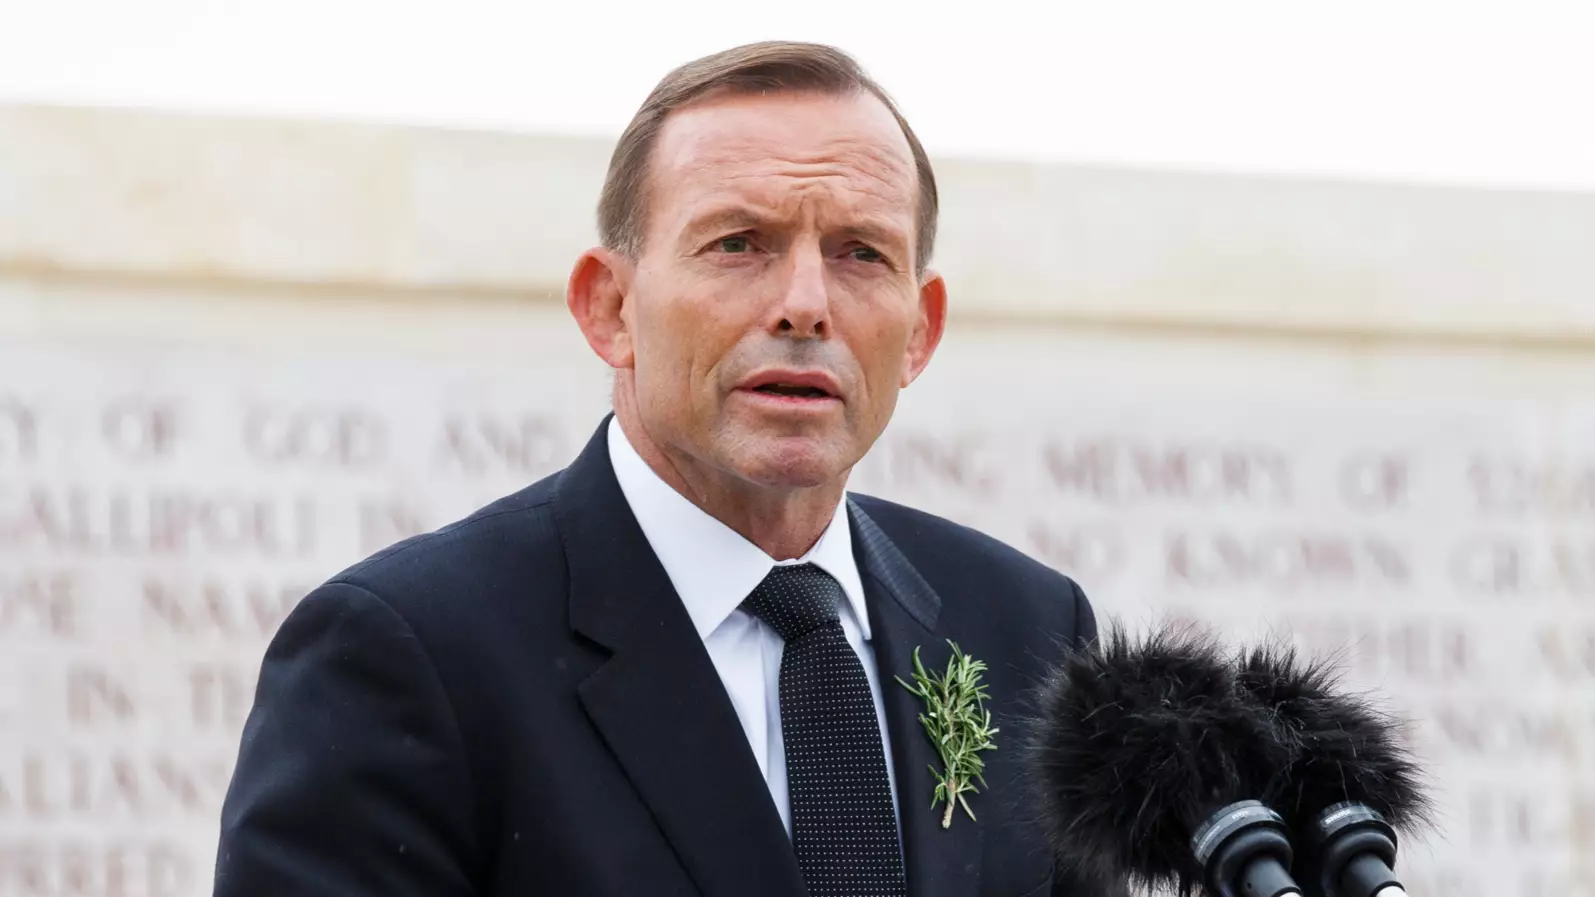 Former PM Tony Abbott Calls For Lockdown And Travel Restrictions To End